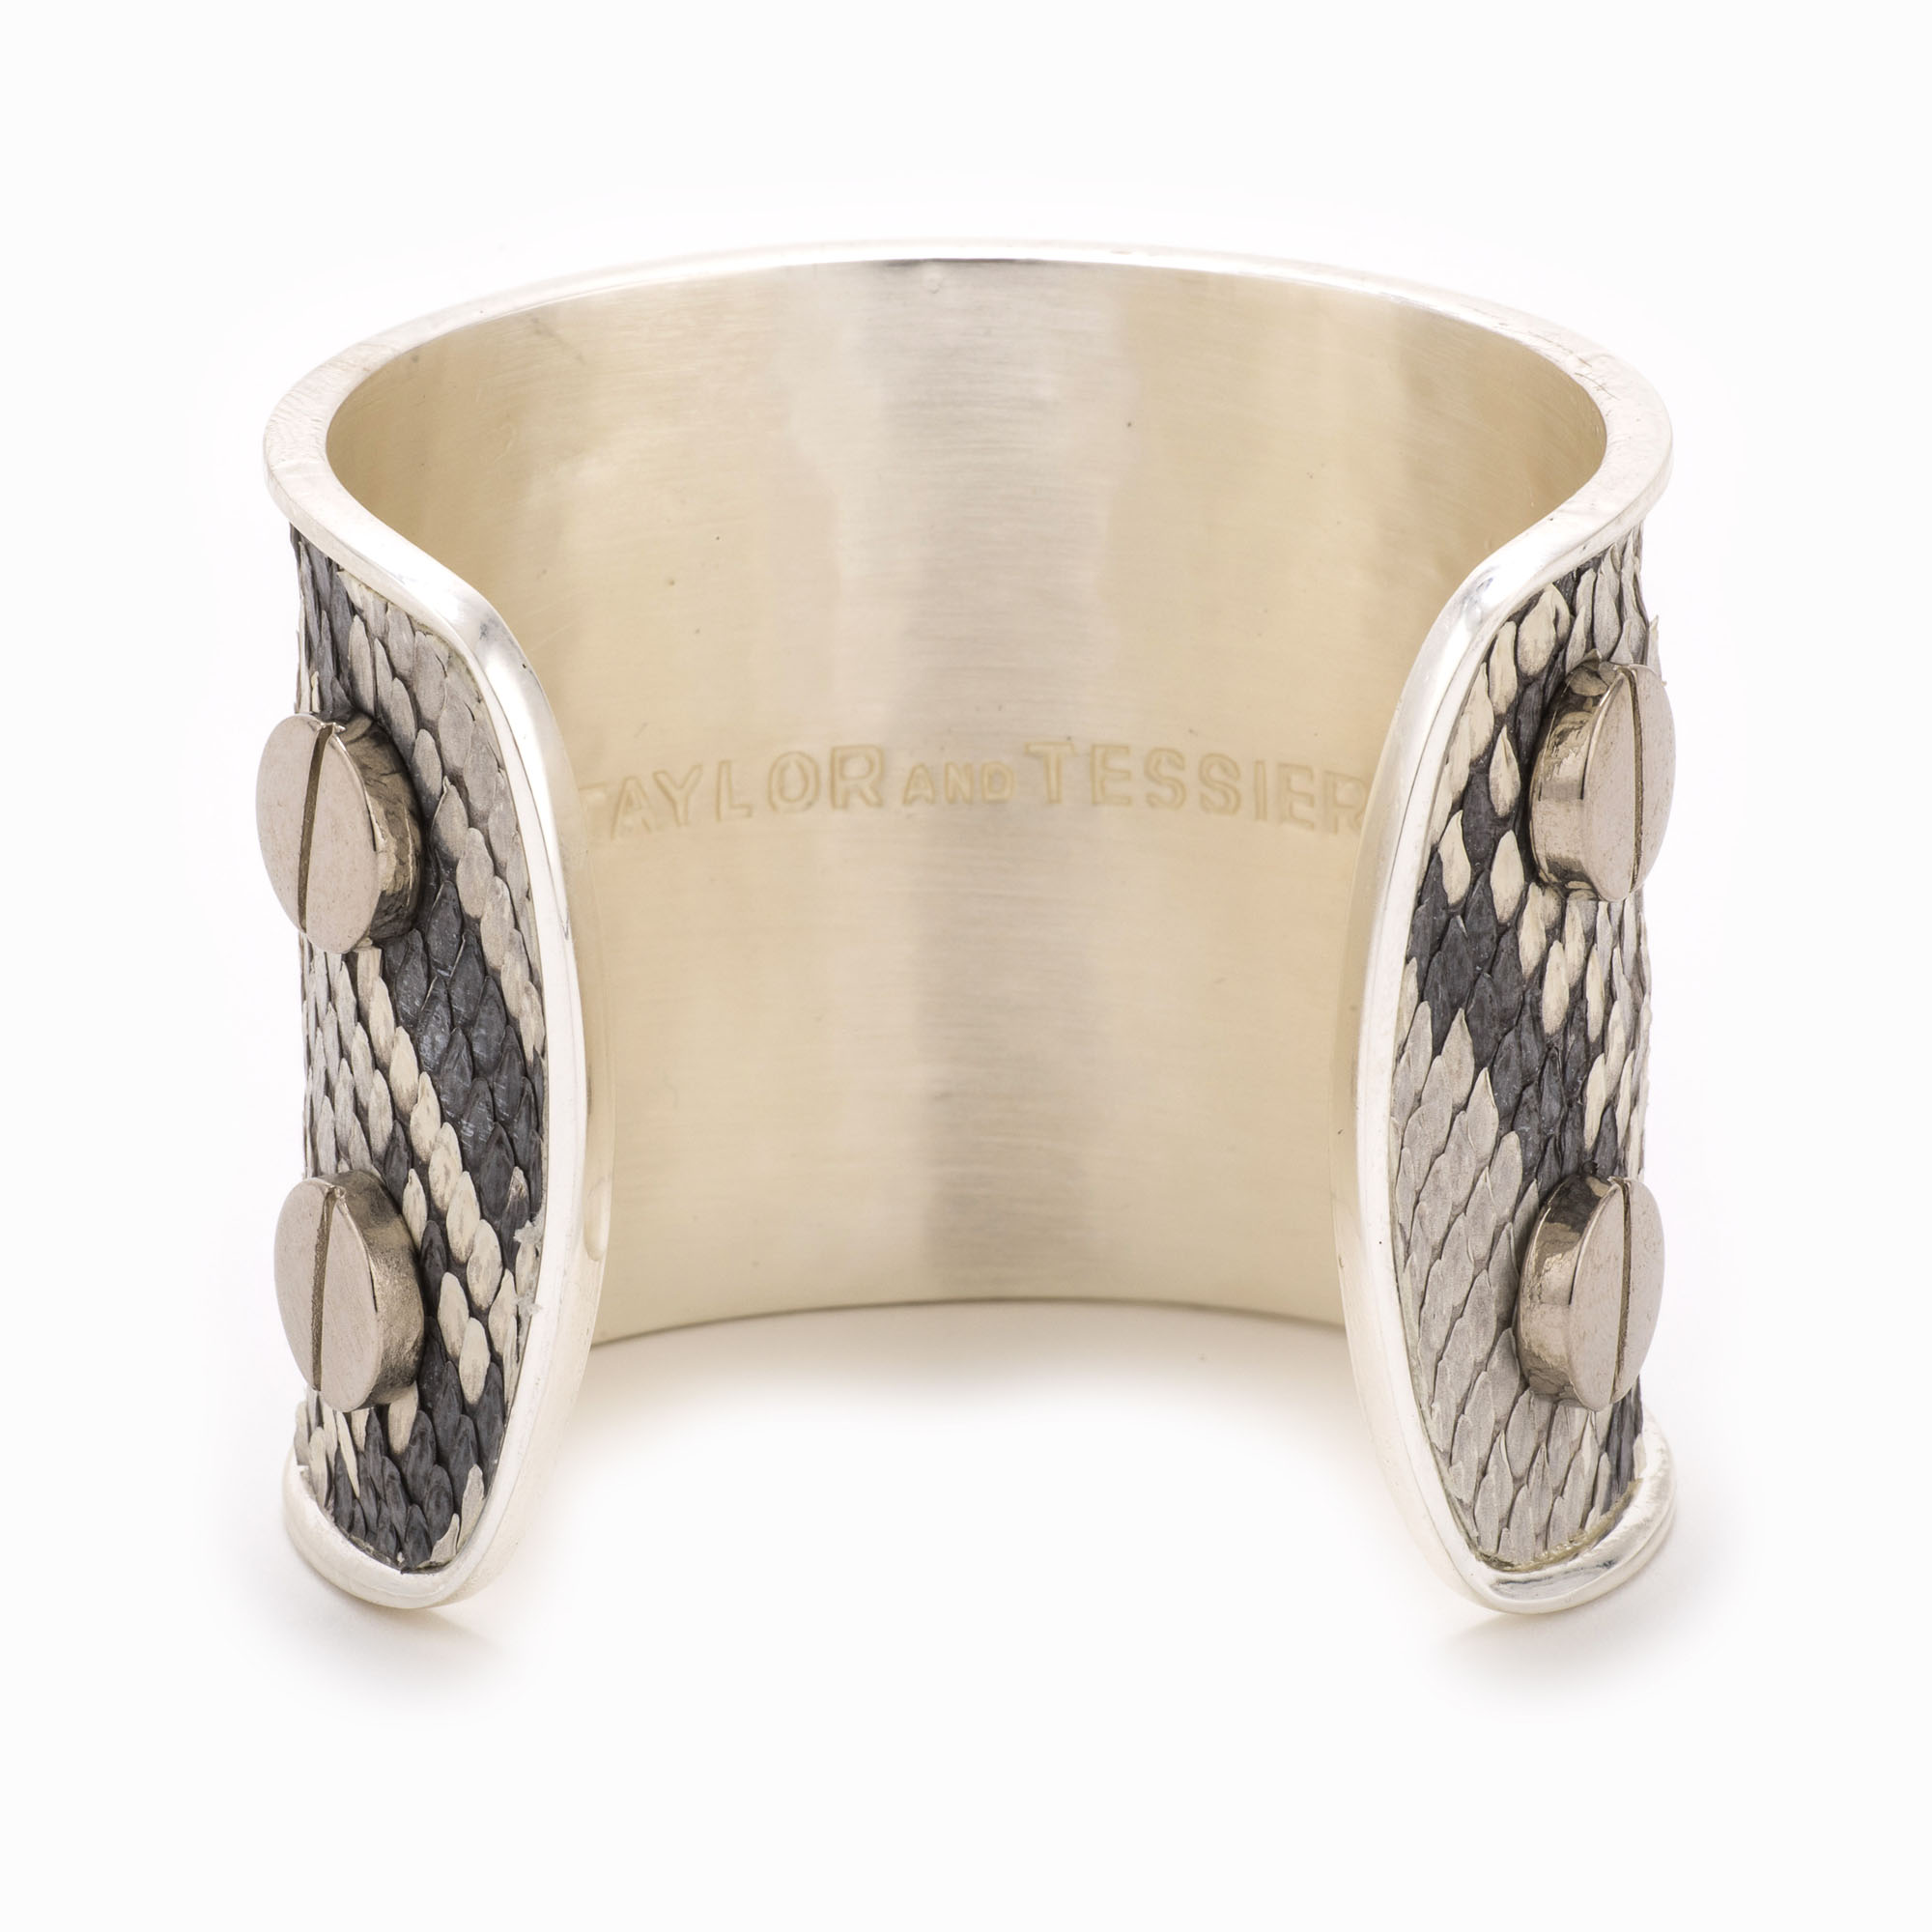 A large silver cuff with black and white colored snakeskin pattern inlaid.